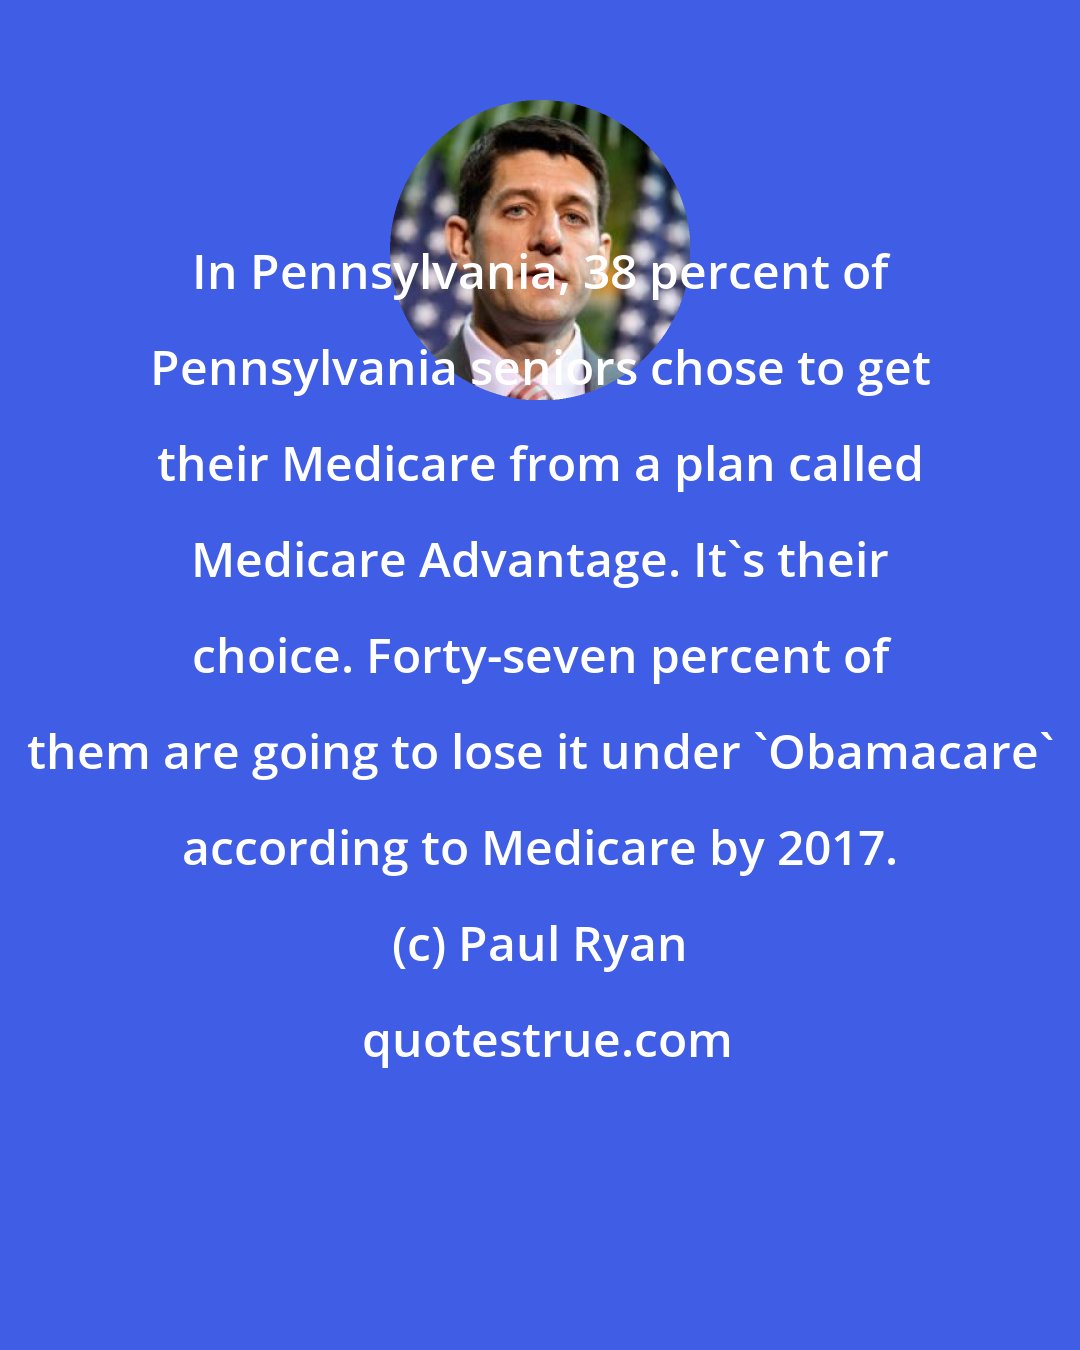 Paul Ryan: In Pennsylvania, 38 percent of Pennsylvania seniors chose to get their Medicare from a plan called Medicare Advantage. It's their choice. Forty-seven percent of them are going to lose it under 'Obamacare' according to Medicare by 2017.